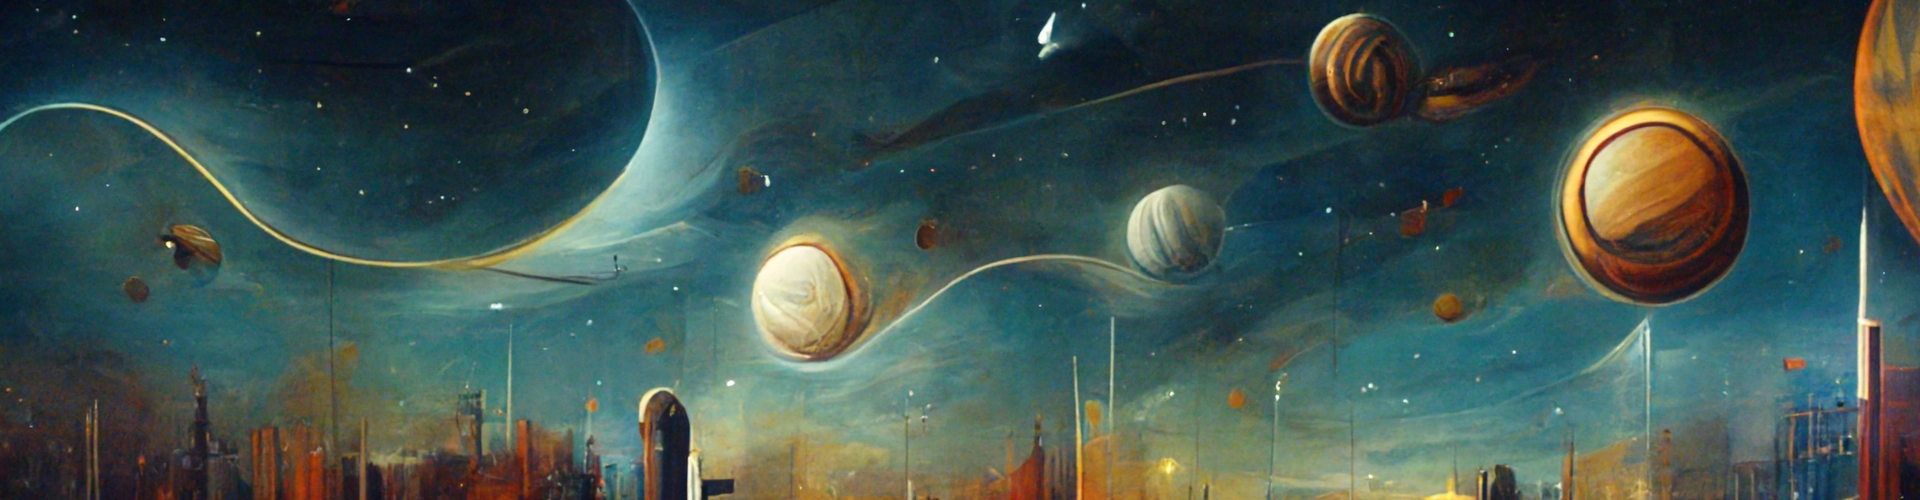 wall mural of stylistic painting of the Tellus star system